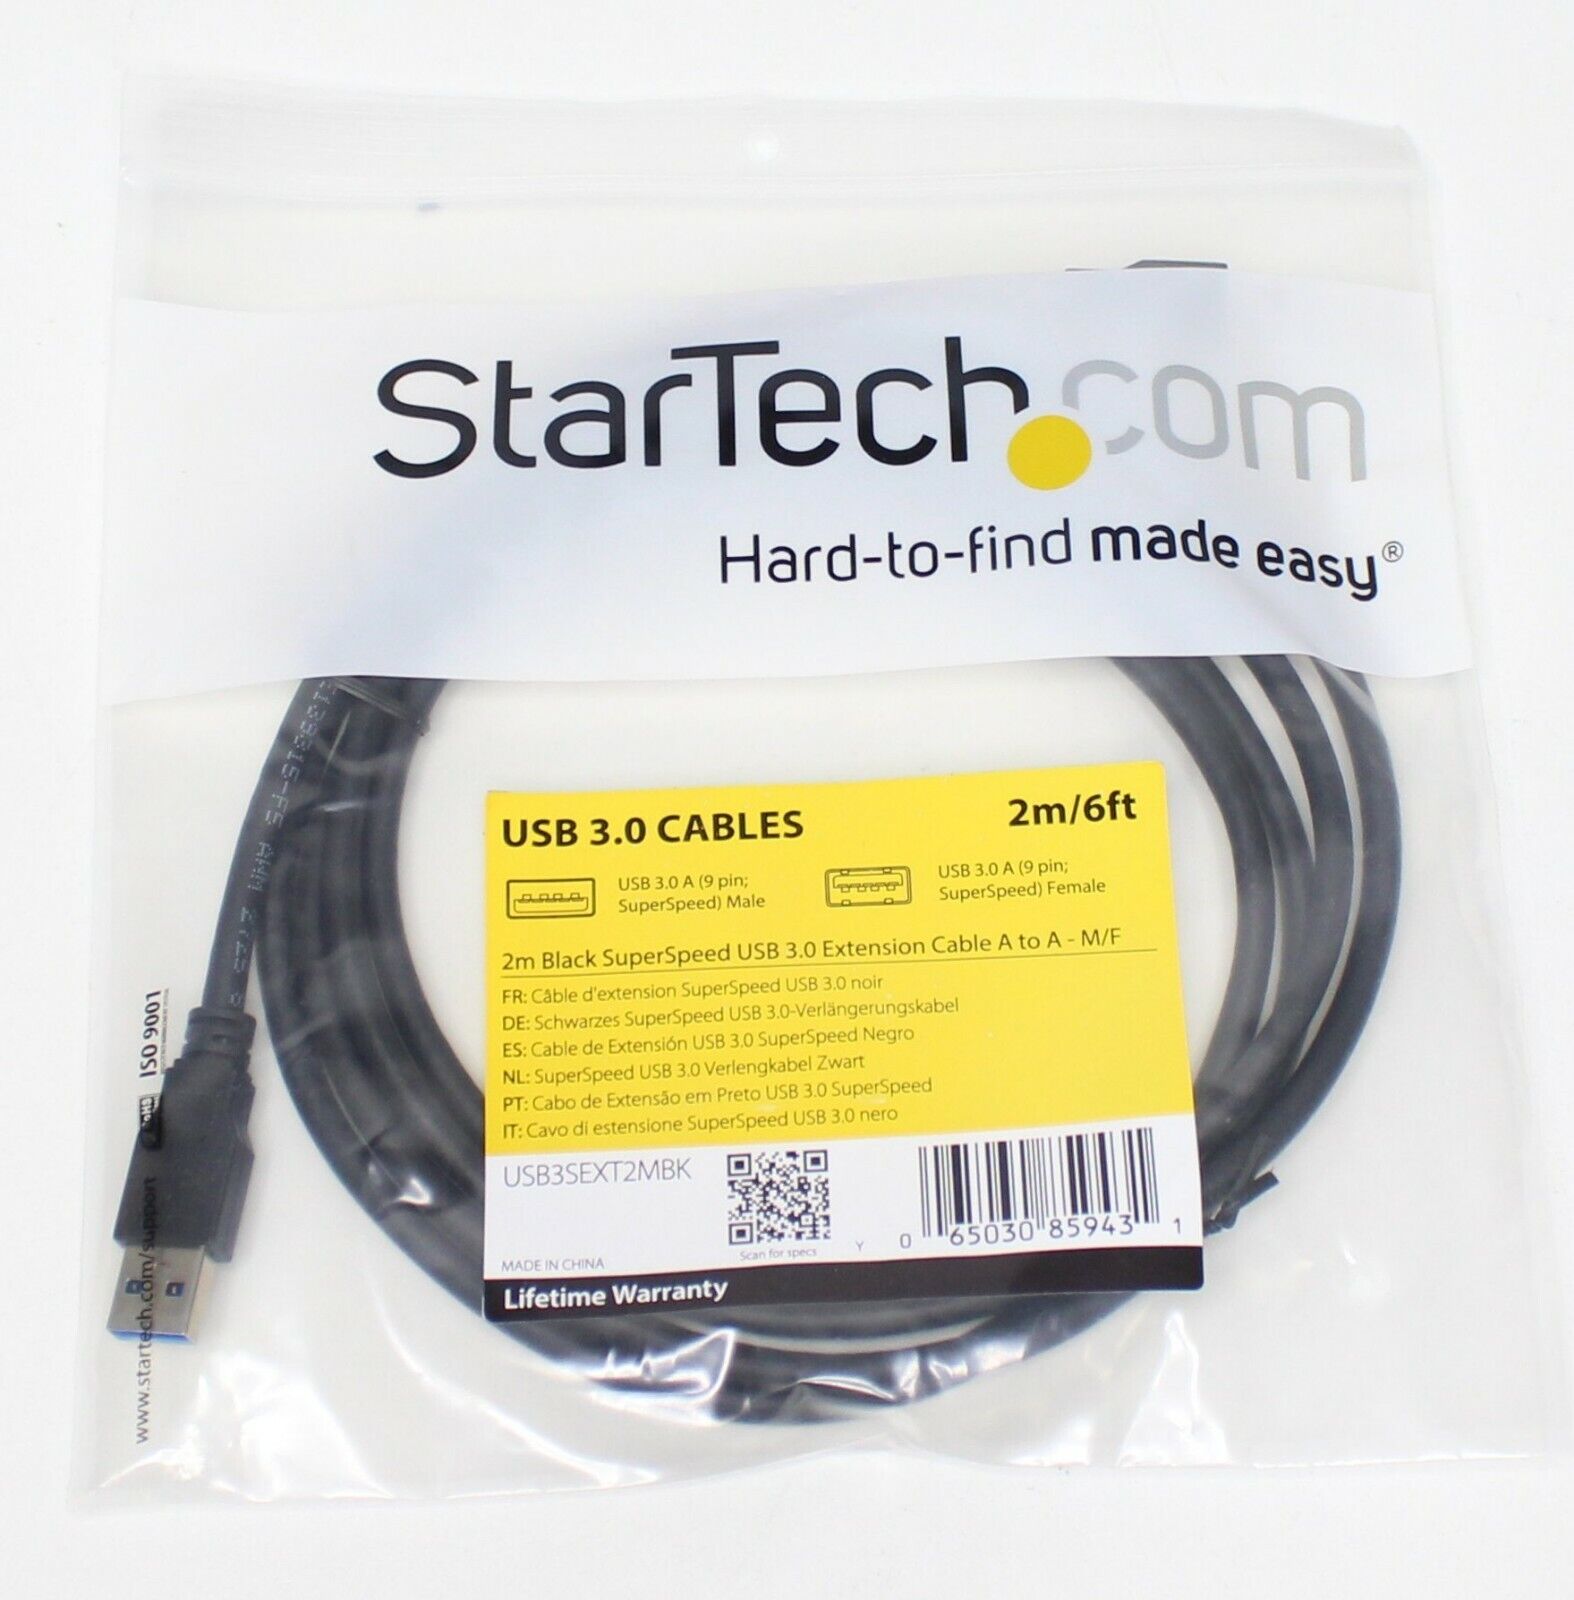 StarTech USB3SEXT2MBK 2m Black SuperSpeed USB 3.0 Extension Cable A to A - M/F